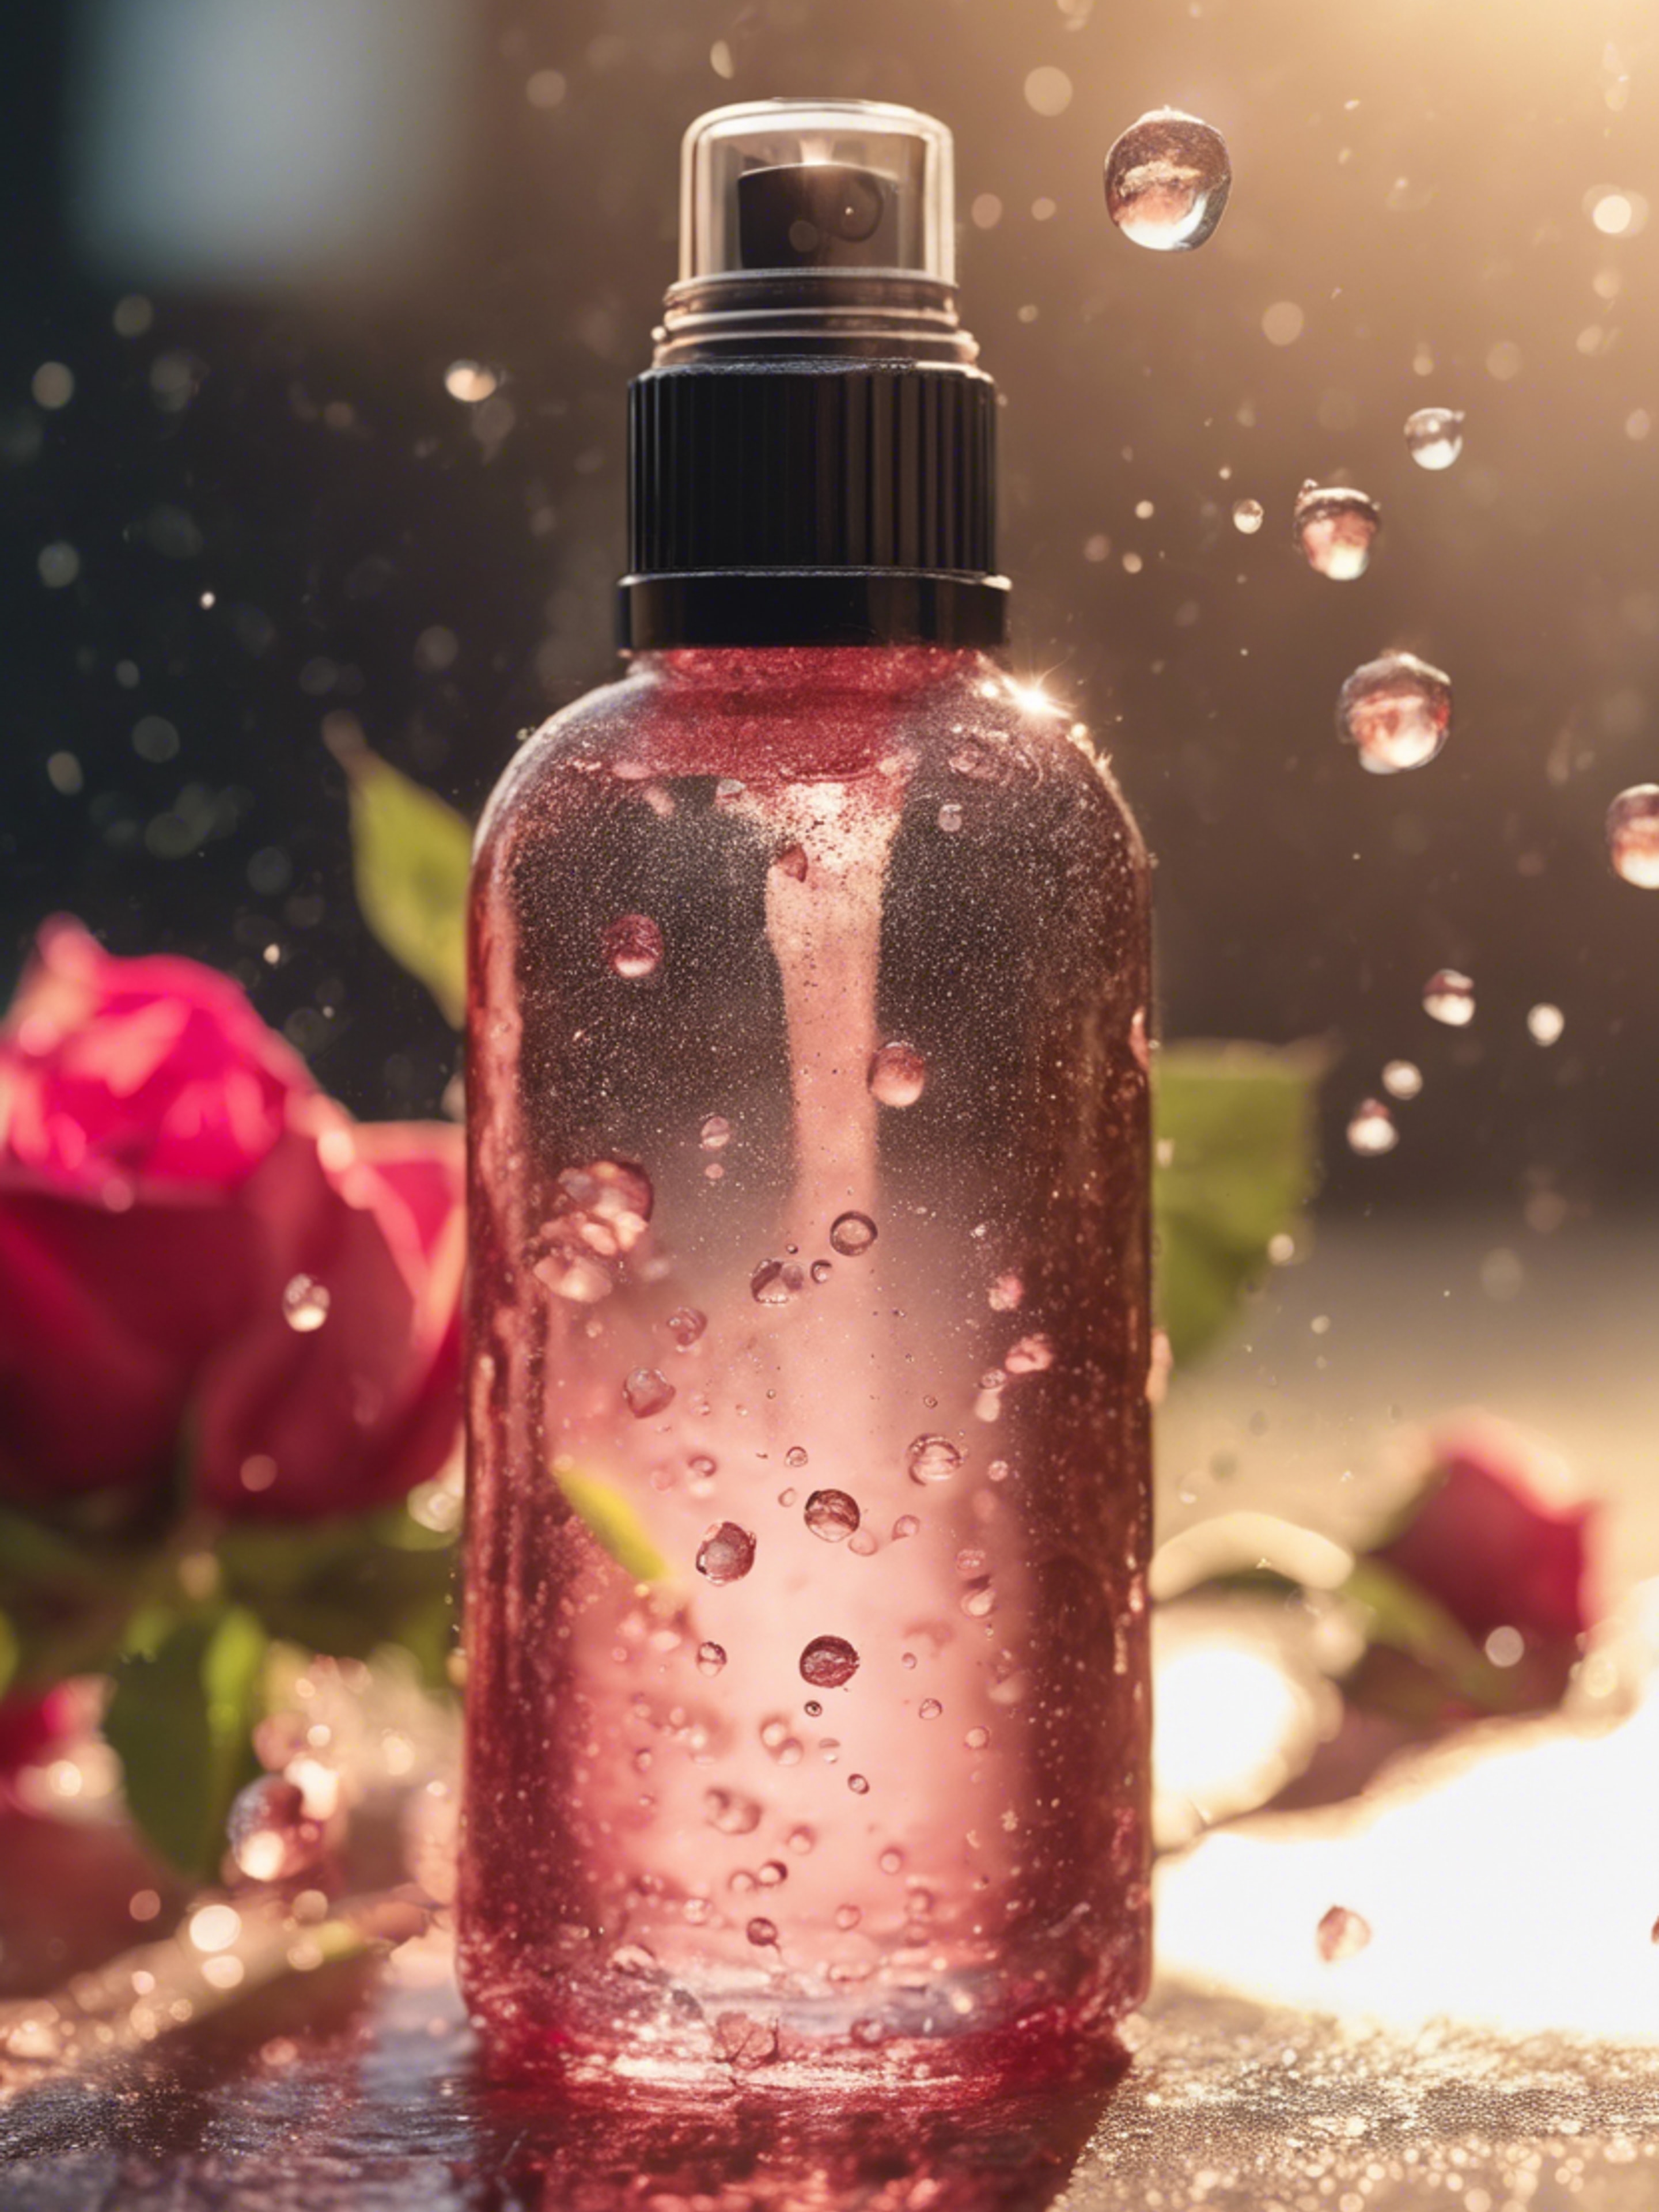 A refreshing spray bottle of rose water toner sprinkling droplets in the sunlight. 牆紙[f1b2cb92d7c7439692a8]